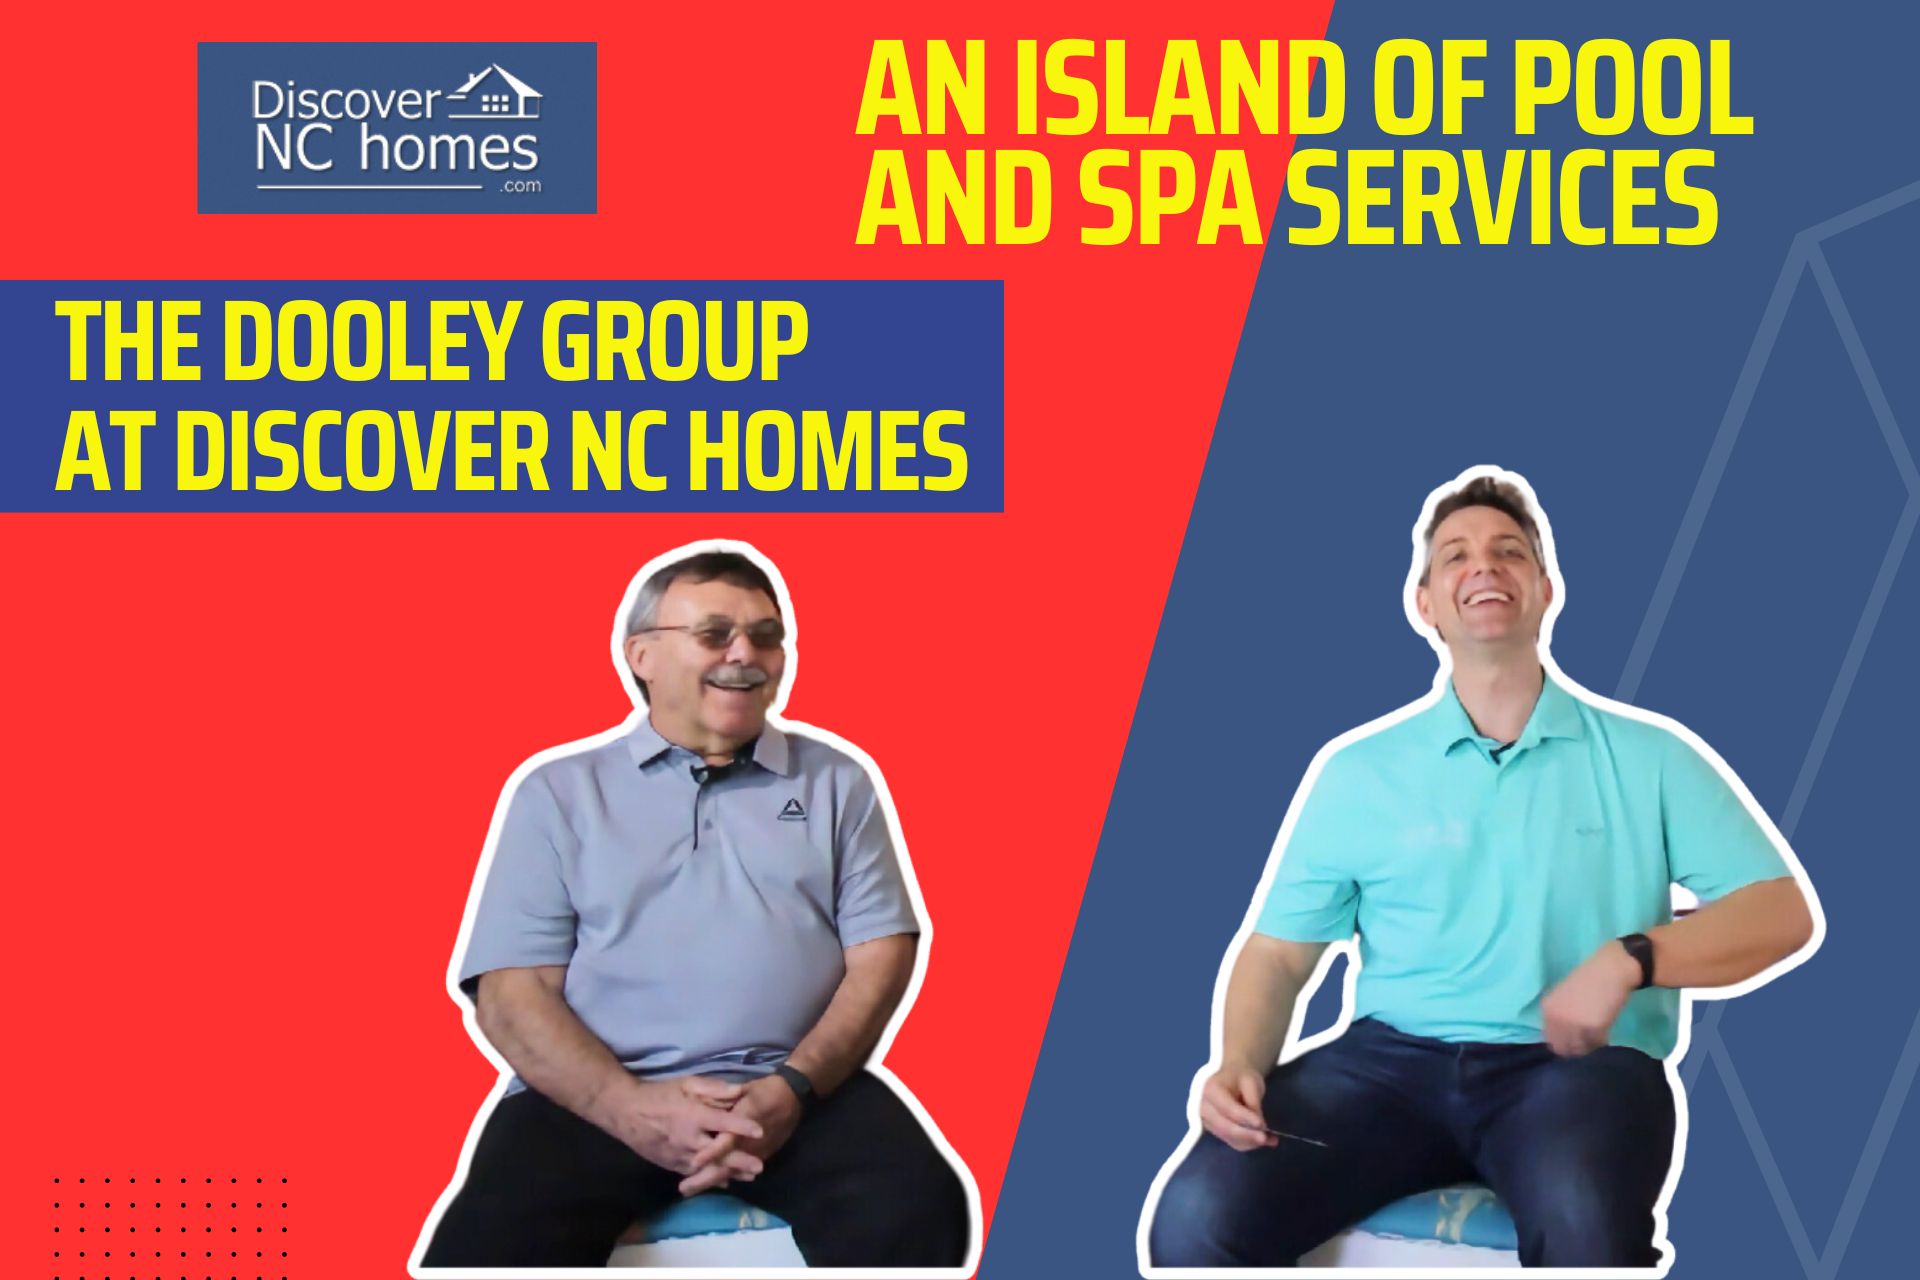 John Dooley interview with David Geary from Island Spas and Pools